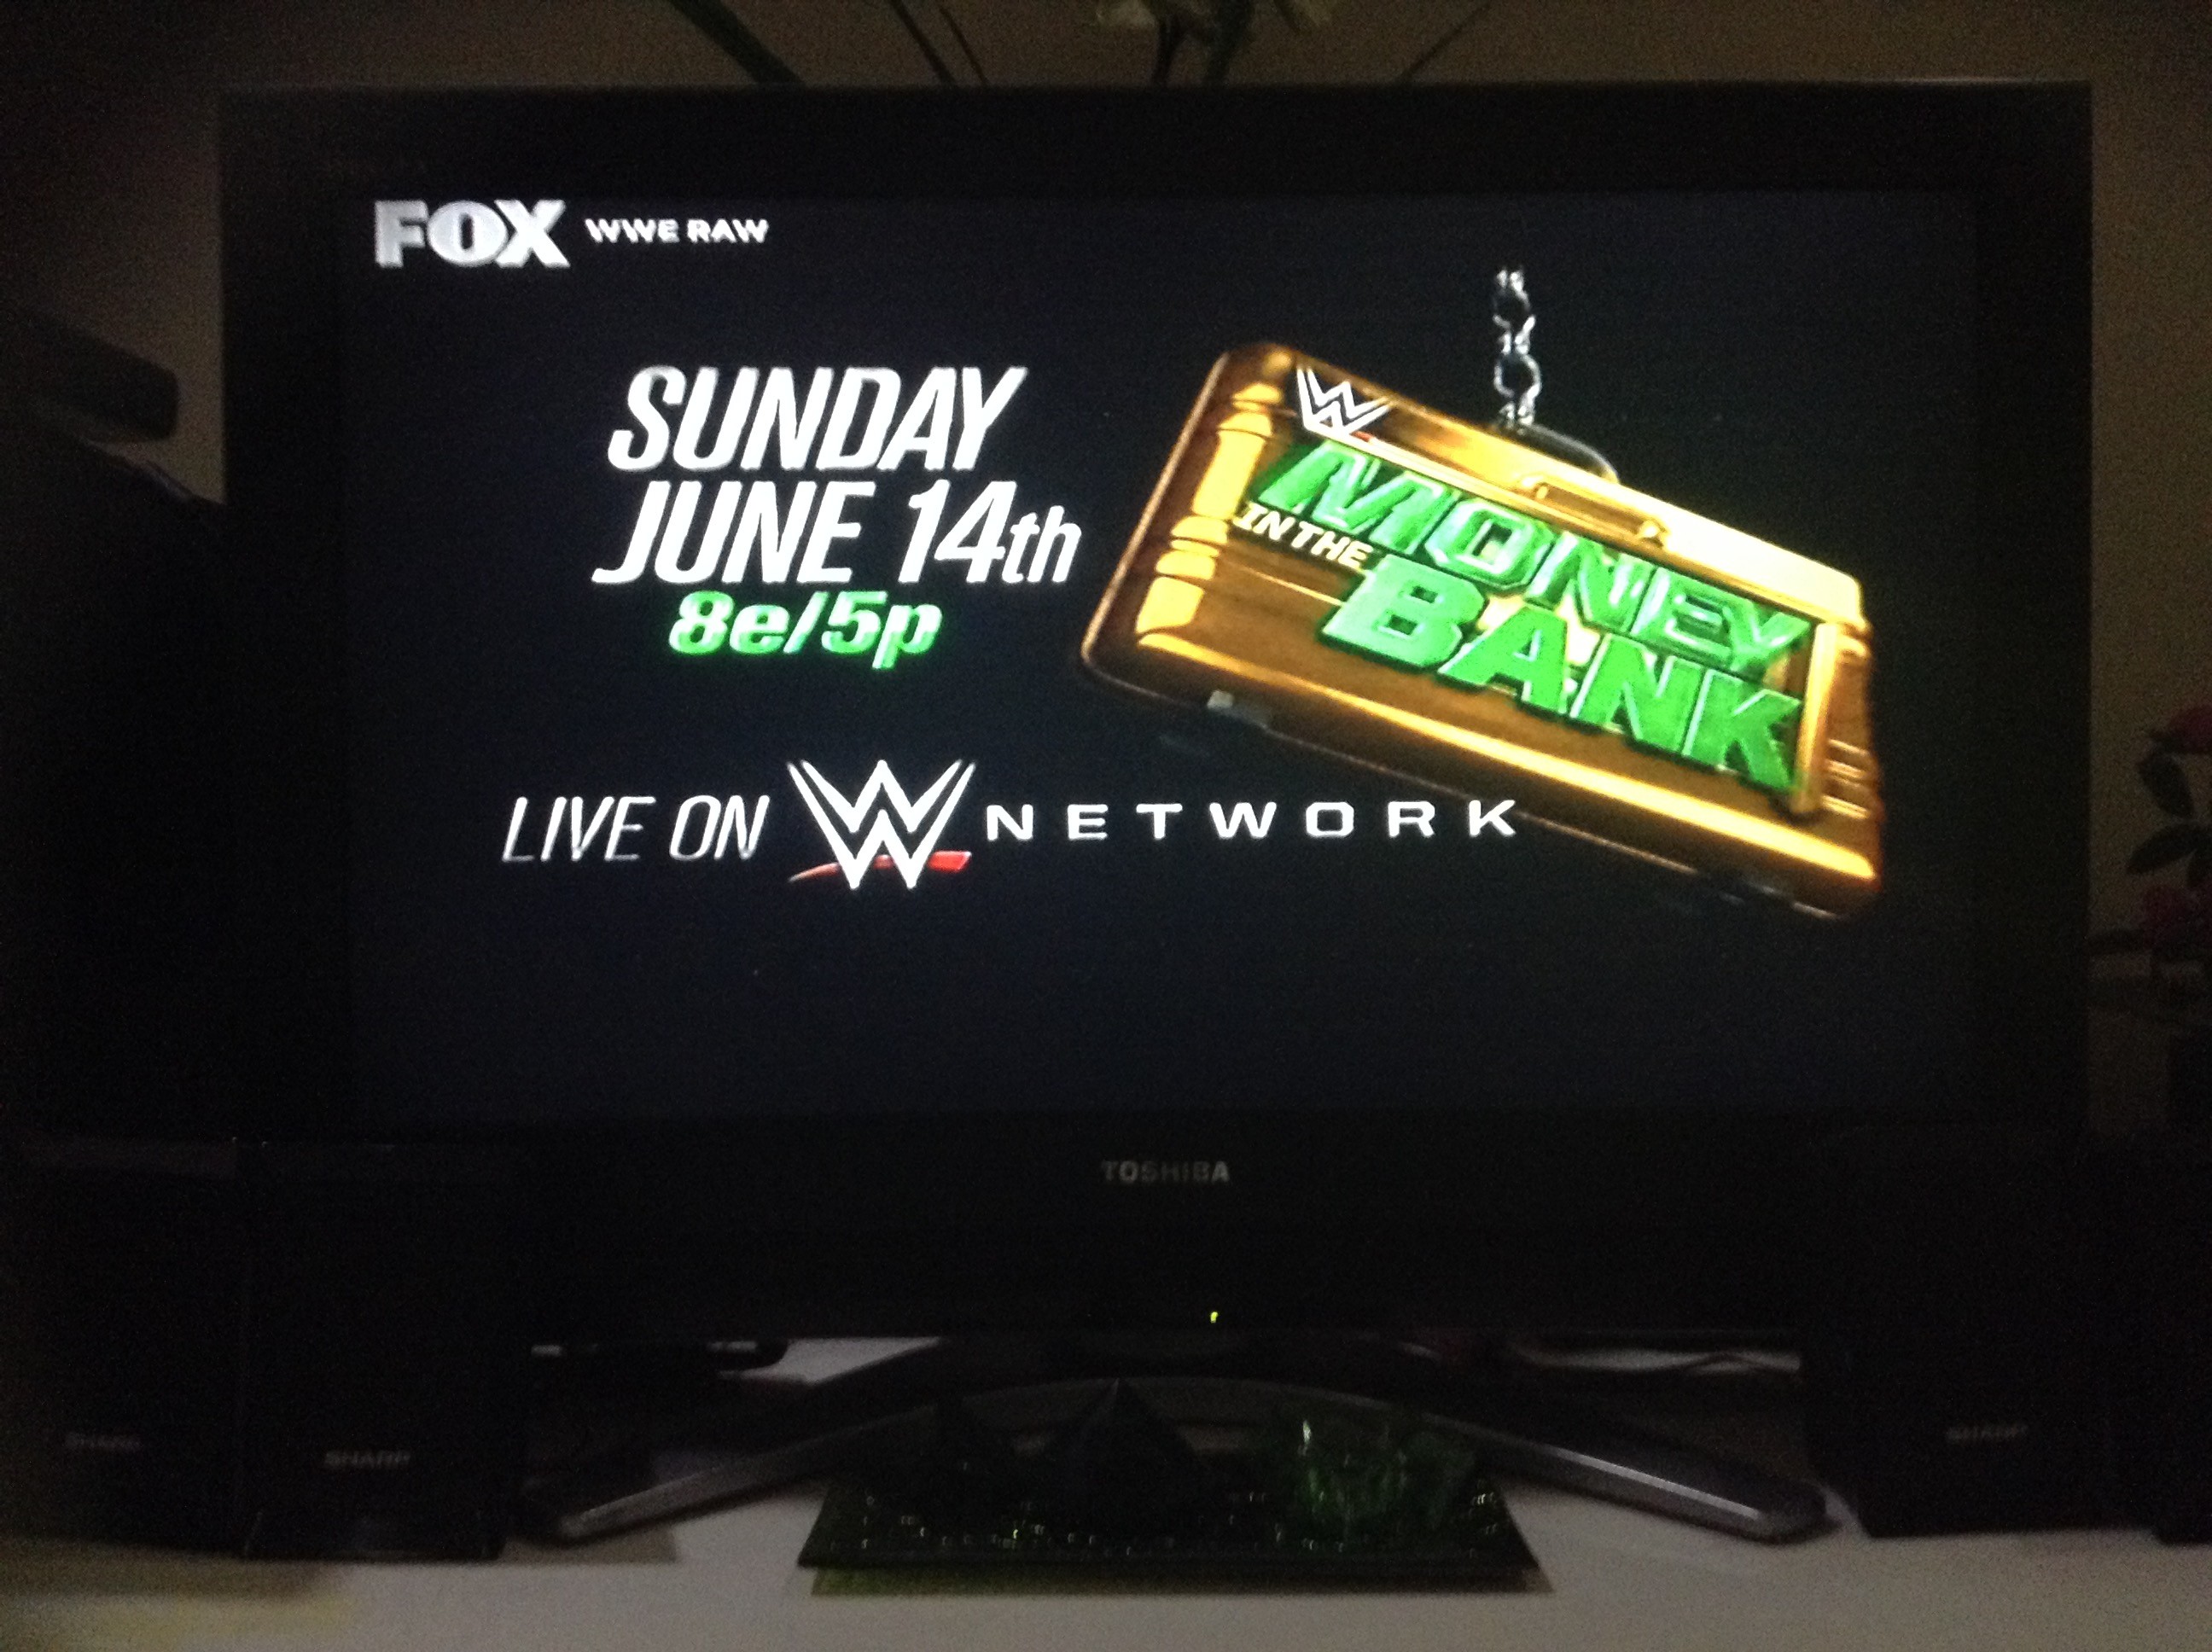 2592x1936 WWE Network images WWE Money in the Bank 2015 at WWE Raw HD wallpaper and  background photos